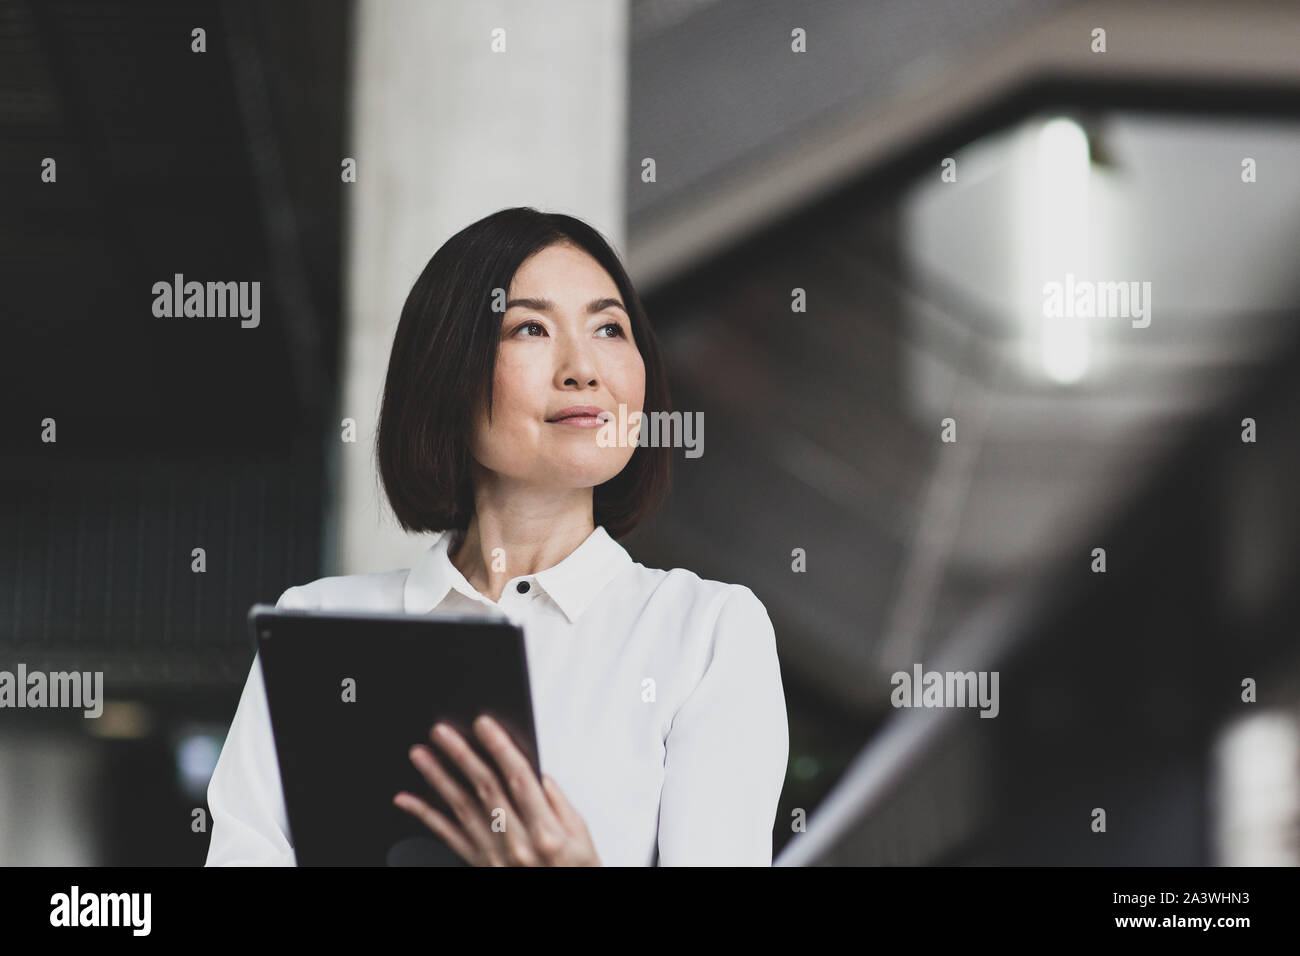 Japanese businesswoman using digital tablet in a Corporate Office Banque D'Images